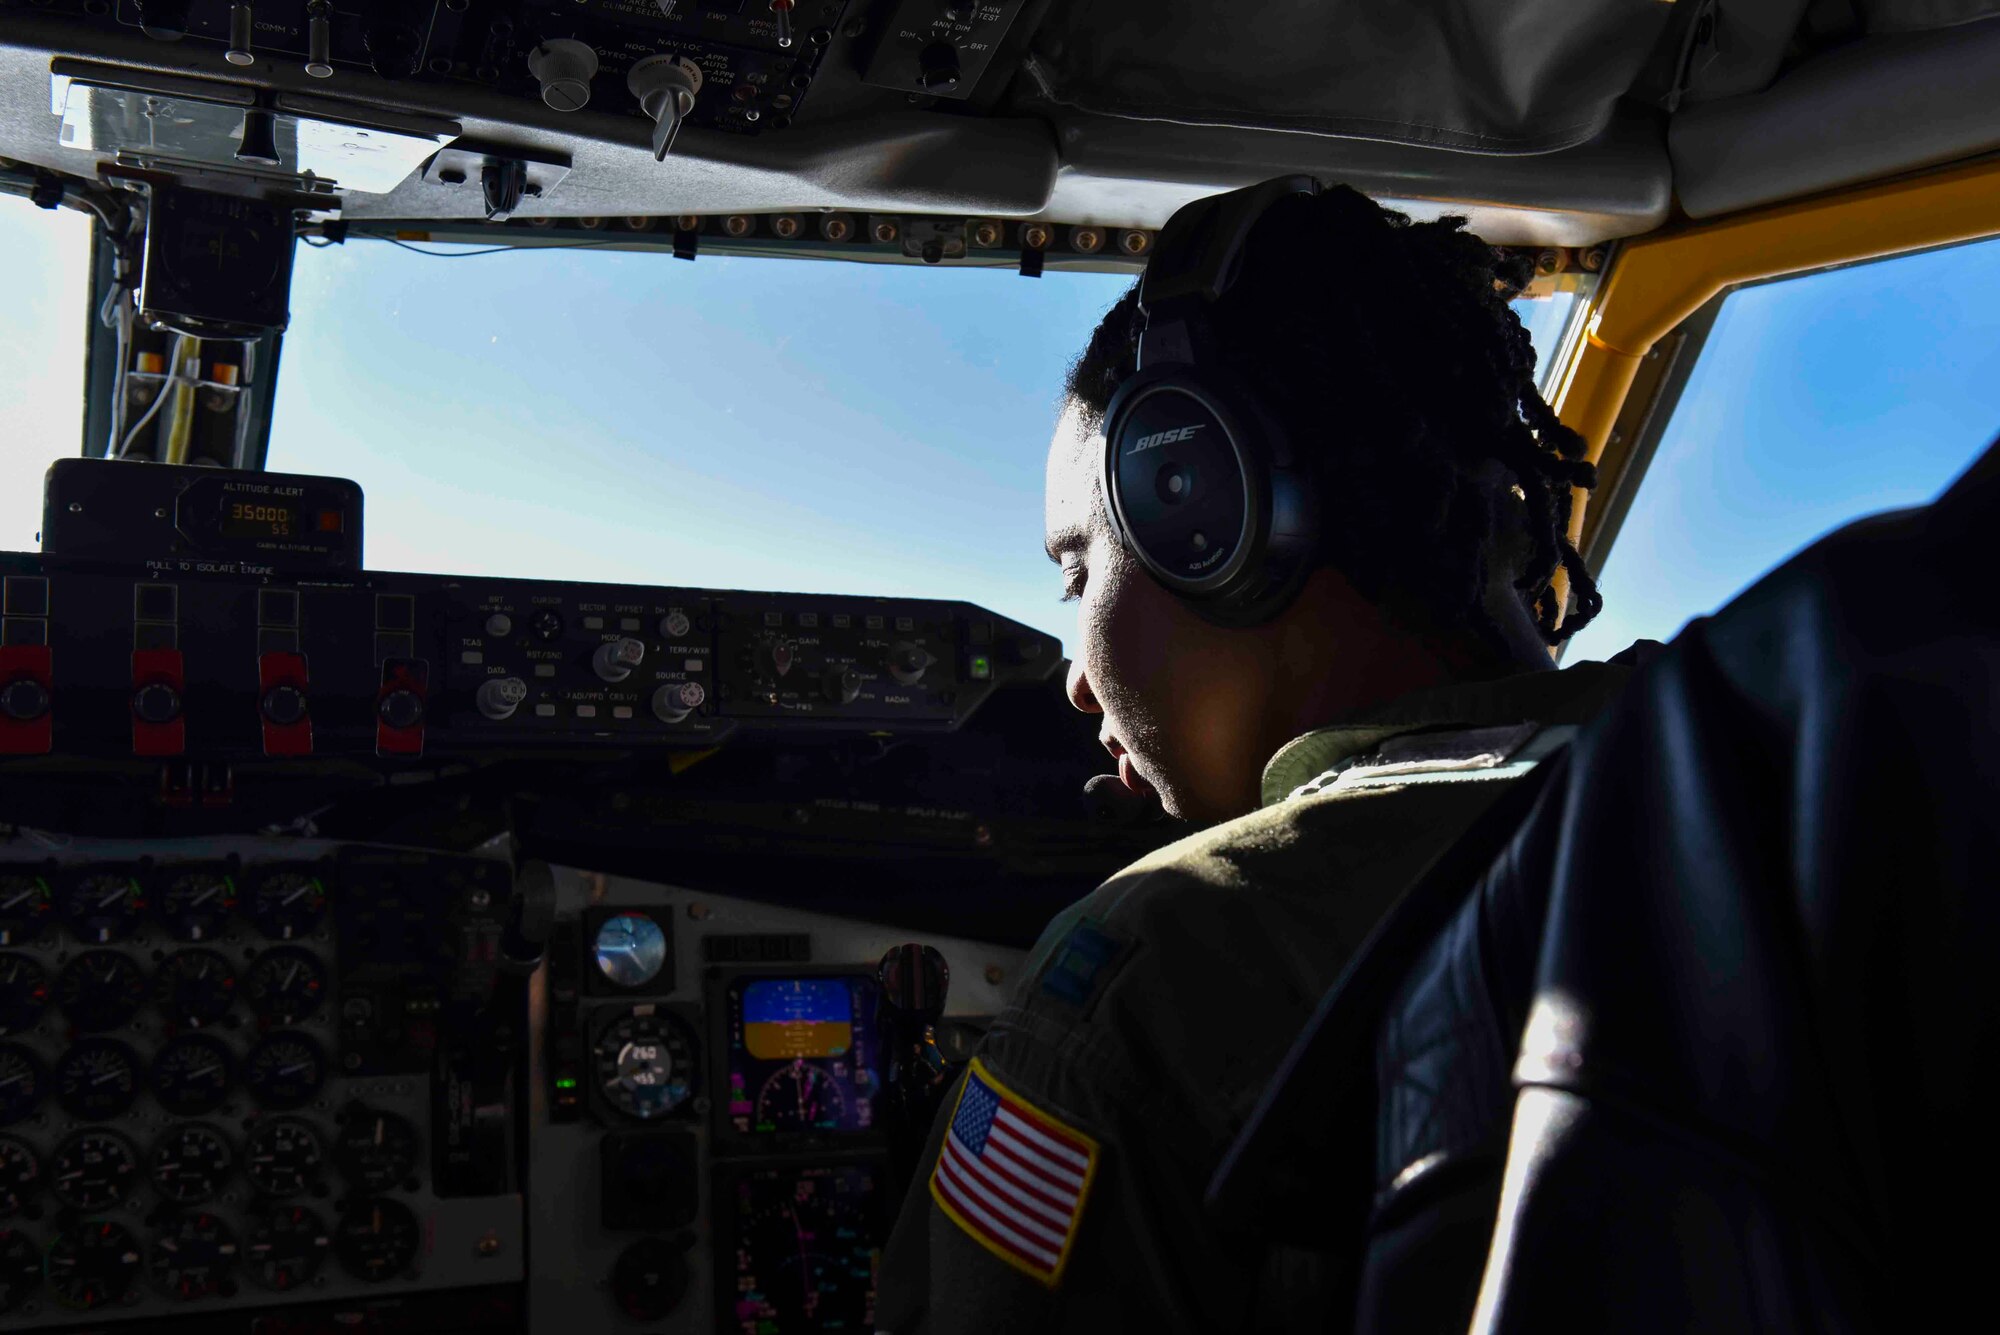 U.S. Air Force Capt. Jazmind Roberts, 93rd Air Refueling Squadron pilot, flies a KC-135 Stratotanker over Alabama, February 18, 2020. Roberts coordinated an all-black aircrew for a refueling mission to Maxwell Air Force Base,  Alabama, to refuel four F-16 Fighting Falcons from the Red Tail Squadron of the 187 Fighter Wing. (U.S. Air Force photo by Airman 1st Class Kiaundra Miller)